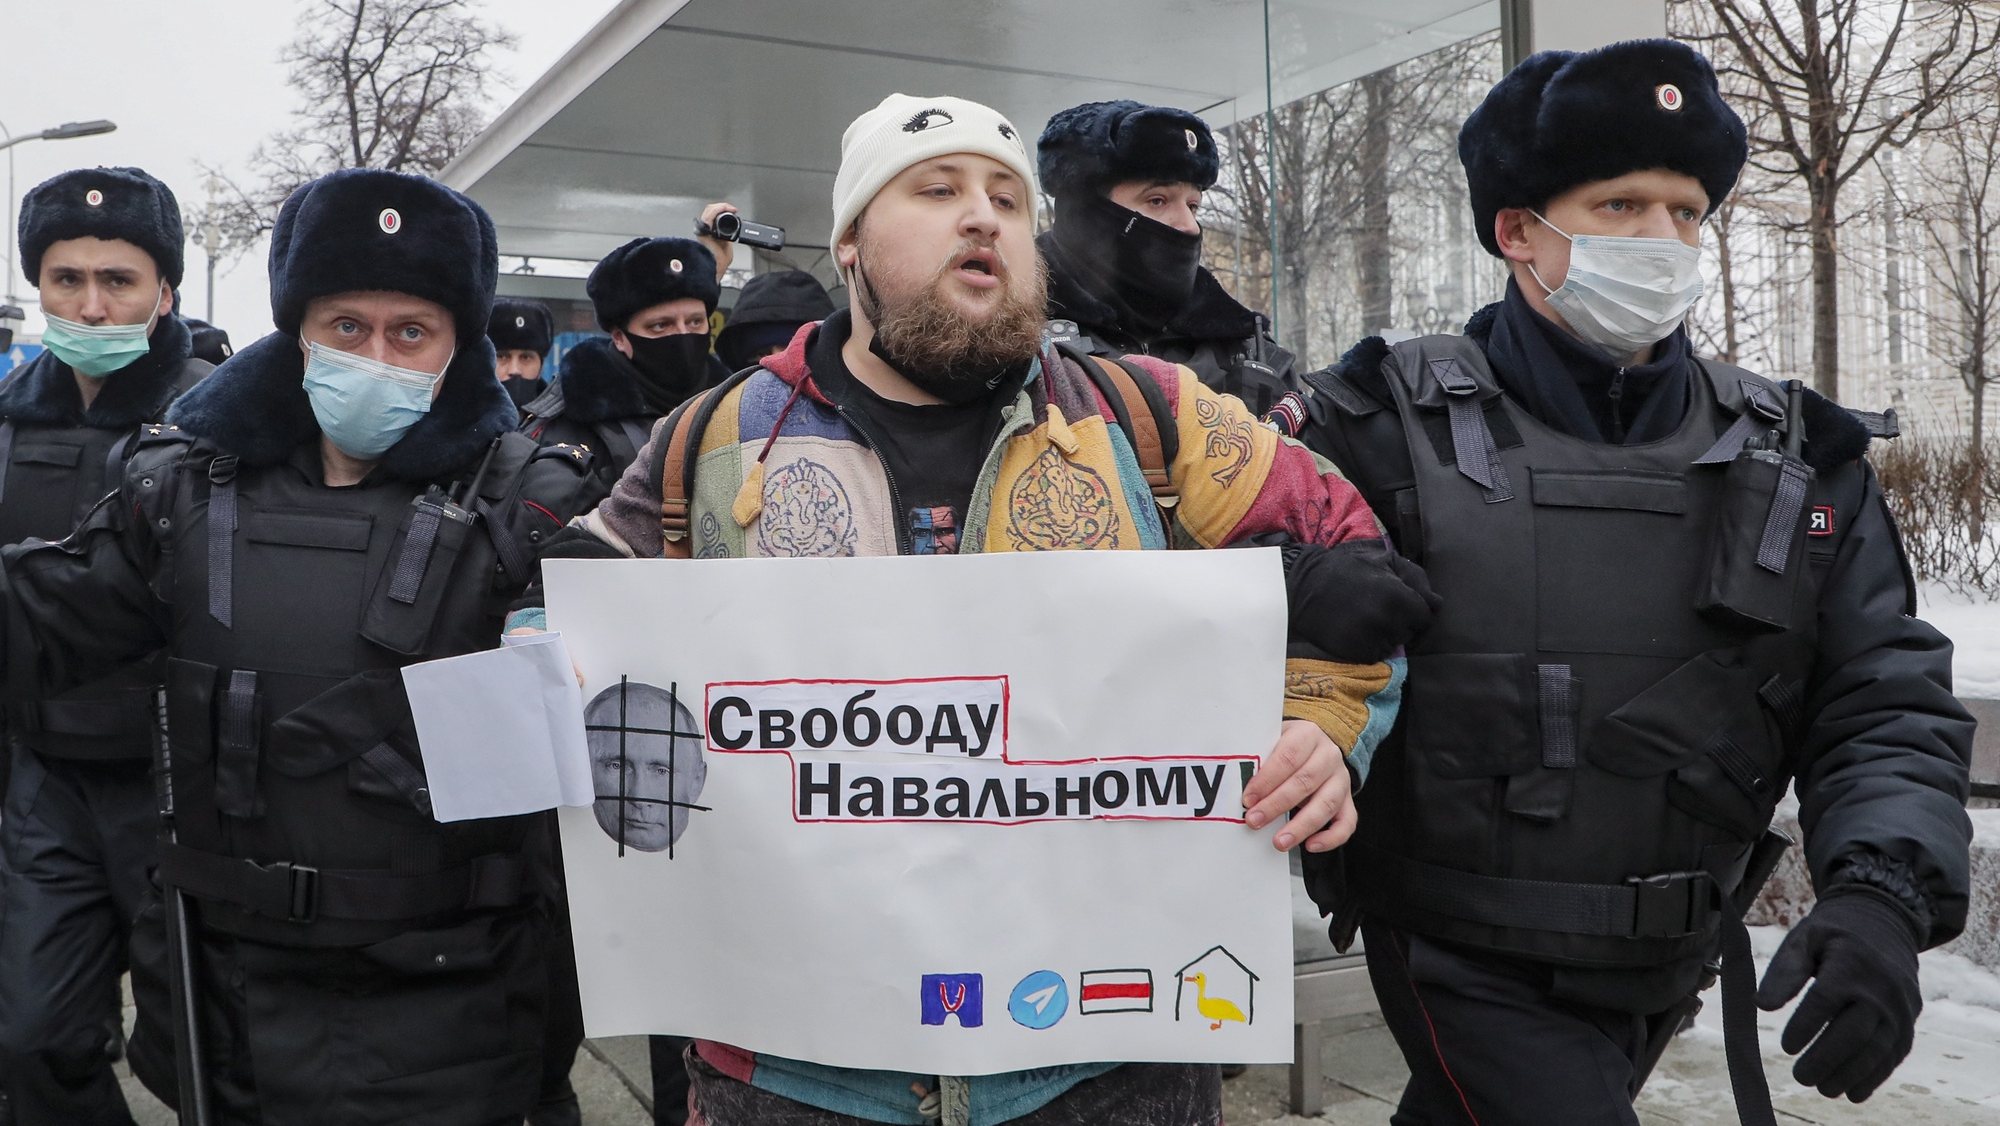 epa08959290 Police officers remove a protester holding a poster showing Russian President Vladimir Putin and reading &#039;Freedom for Navalny&#039; during an unauthorized protest in support of Russian opposition leader and blogger Alexei Navalny, in Moscow, Russia, 23 January 2021. Navalny was detained after his arrival to Moscow from Germany on 17 January 2021. A Moscow judge on 18 January ruled that he will remain in custody for 30 days following his airport arrest. Navalny urged Russians to take to the streets to protest. In many Russian cities mass events are prohibited due to an increasing number of cases of the COVID-19 pandemic caused by the SARS CoV-2 coronavirus.  EPA/MAXIM SHIPENKOV